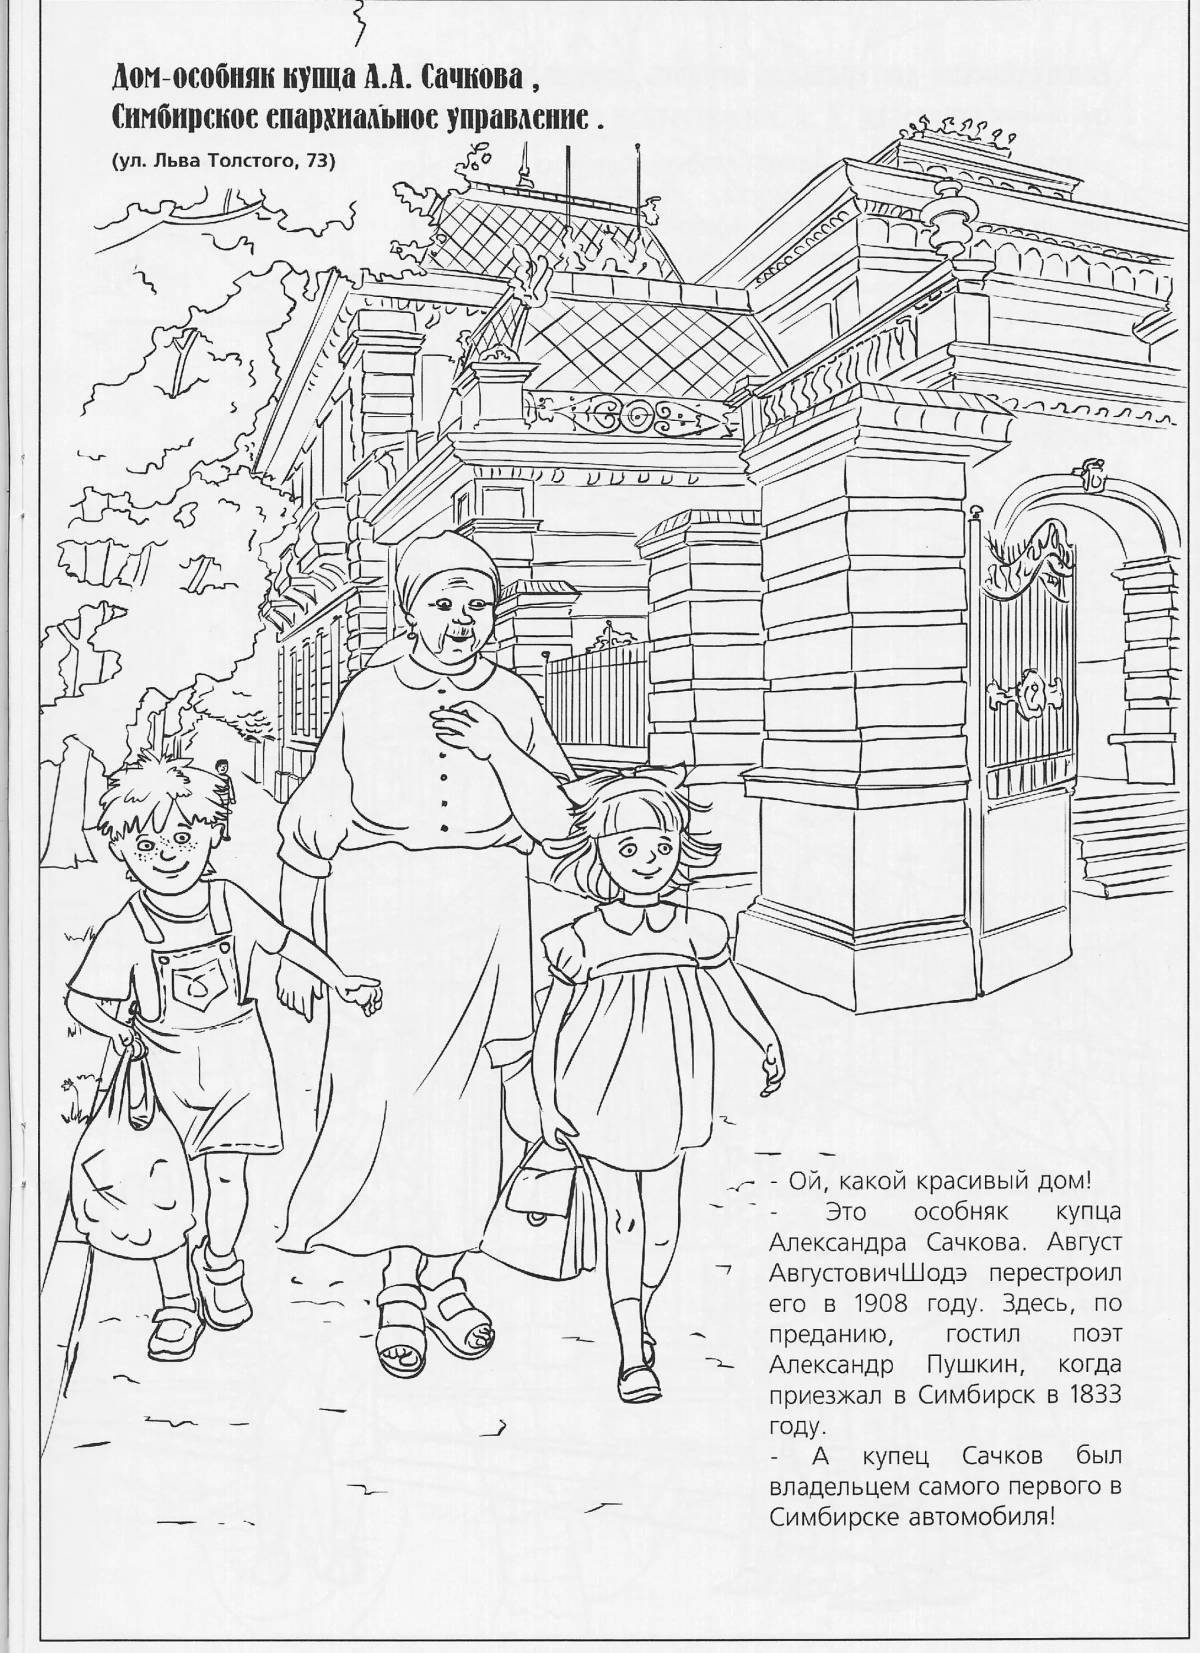 Colourful ulyanovsk region coloring page